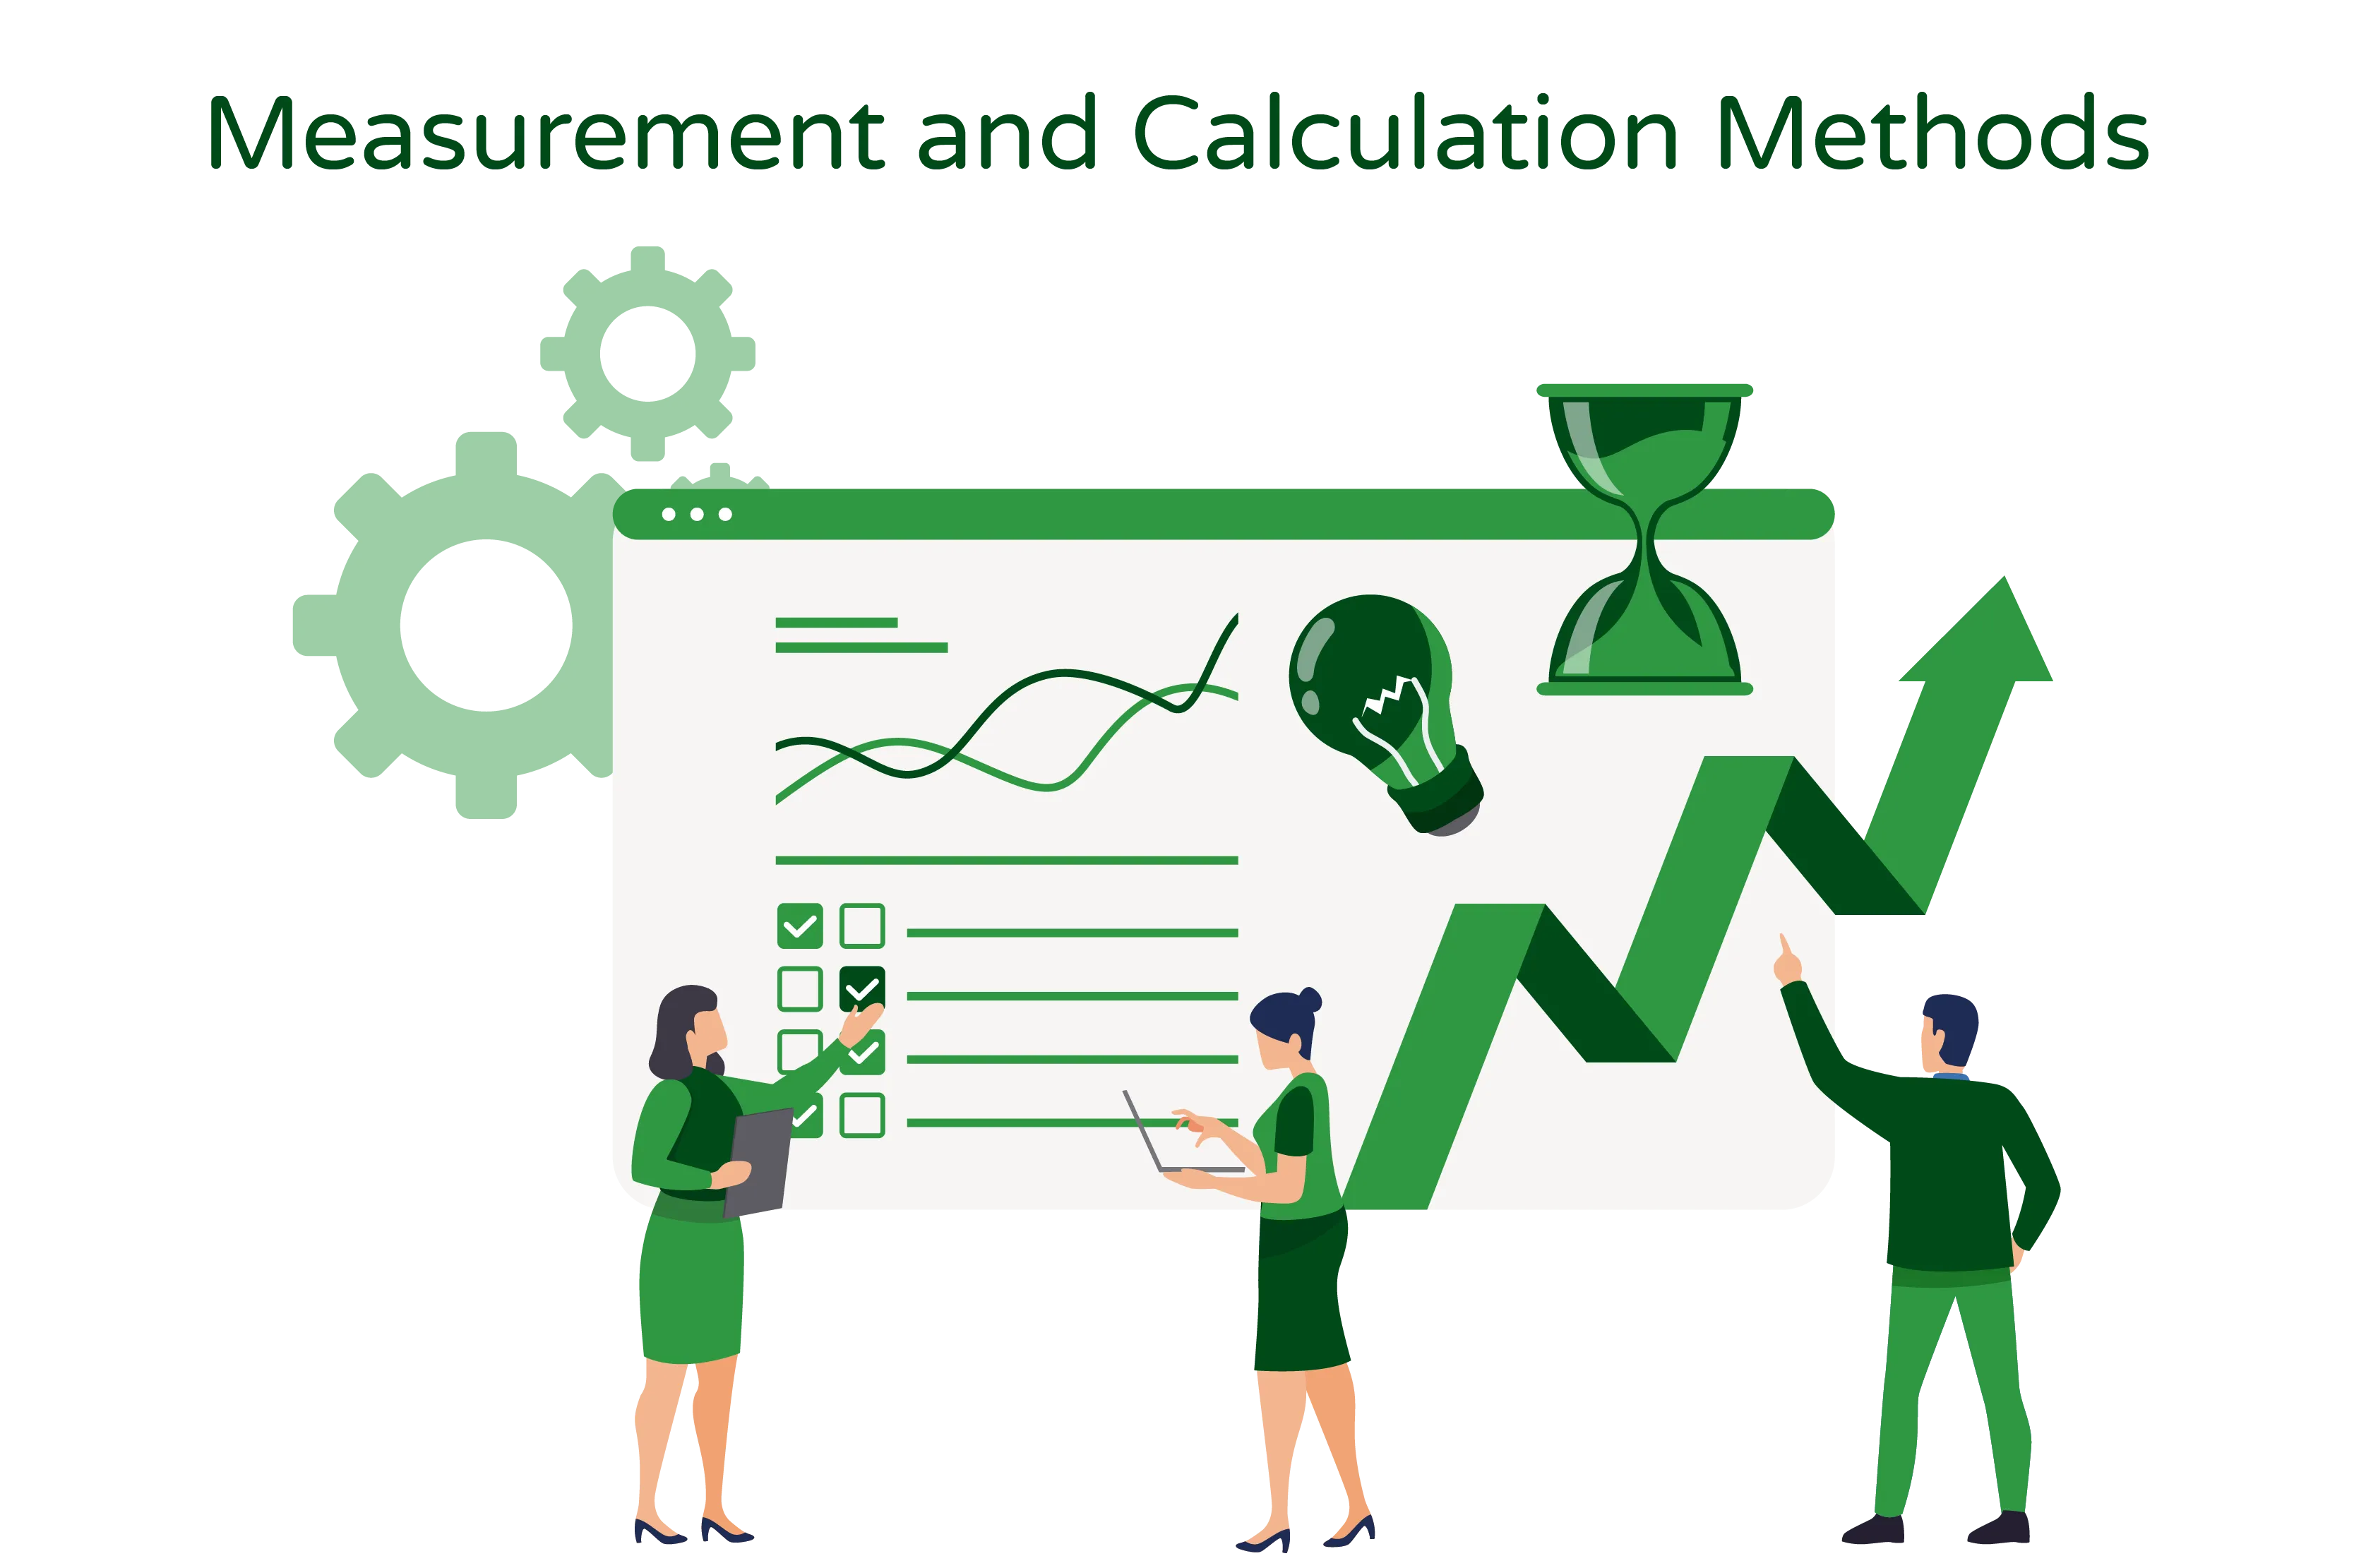 Illustration titled 'Measurement and Calculation Methods' showcases three individuals and a large screen displaying various measurement methods, including graphs, lines, true and false indicators, with a lightbulb symbol in one corner and settings symbols in the other corner."  The illustration visually represents the concept of measurement and calculation methods in carbon accounting, as indicated by the title. The three individuals symbolize the engagement and involvement of people in the process of measuring and calculating data.  The central focus of the illustration is a large screen that displays different measurement methods, such as graphs and lines, representing data visualization and analysis. The presence of true and false indicators suggests the evaluation and assessment of data accuracy. The lightbulb symbol may signify insights or discoveries derived from the data analysis process.  In one corner of the screen, settings symbols are visible, indicating the customizable nature of the measurement and calculation methods, allowing for adjustments and configurations as needed.  Overall, the 'Measurement and Calculation Methods' illustration visually represents the process of collecting, analyzing, and interpreting carbon data through various methods. It underscores the importance of accurate measurement and calculation techniques in decision-making and problem-solving endeavors.